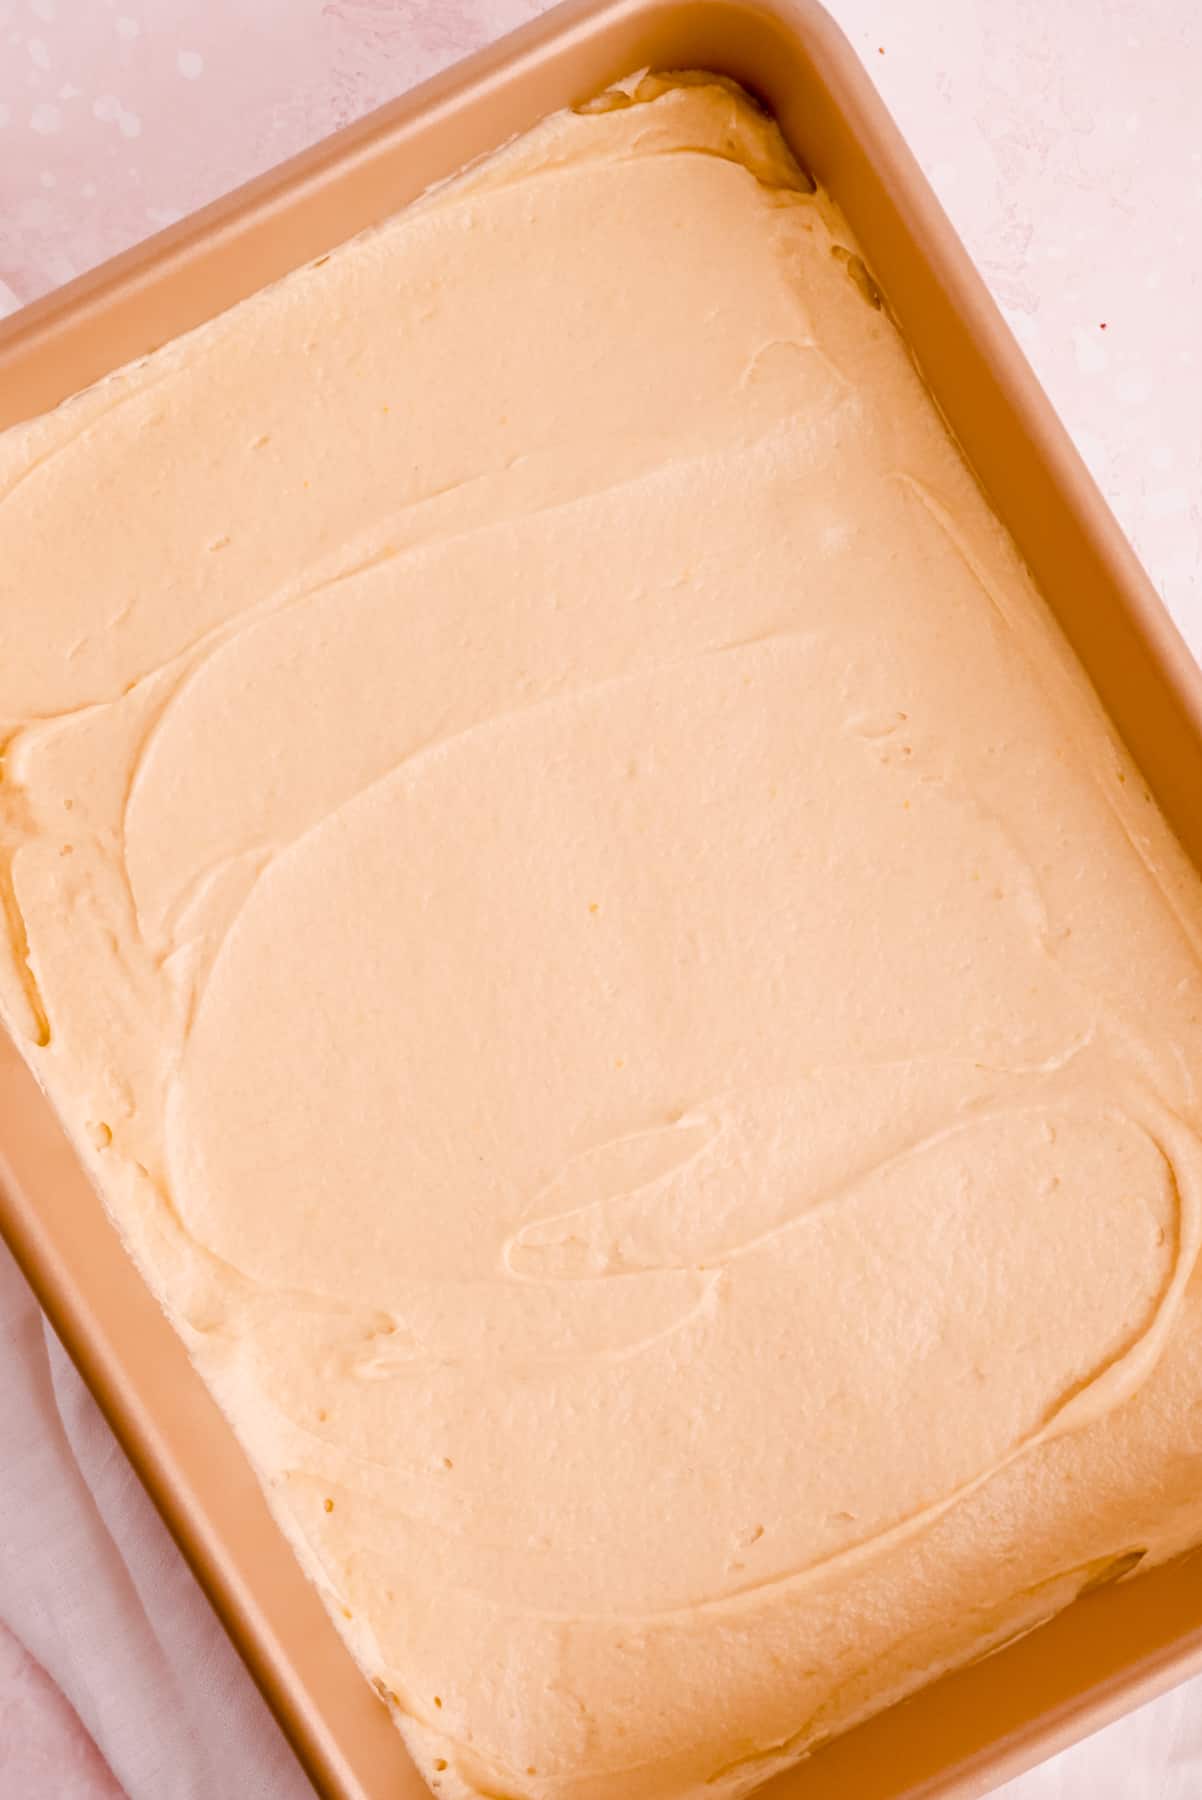 batter for an easy vanilla sheet cake in a 9" x 13" pan ready to bake